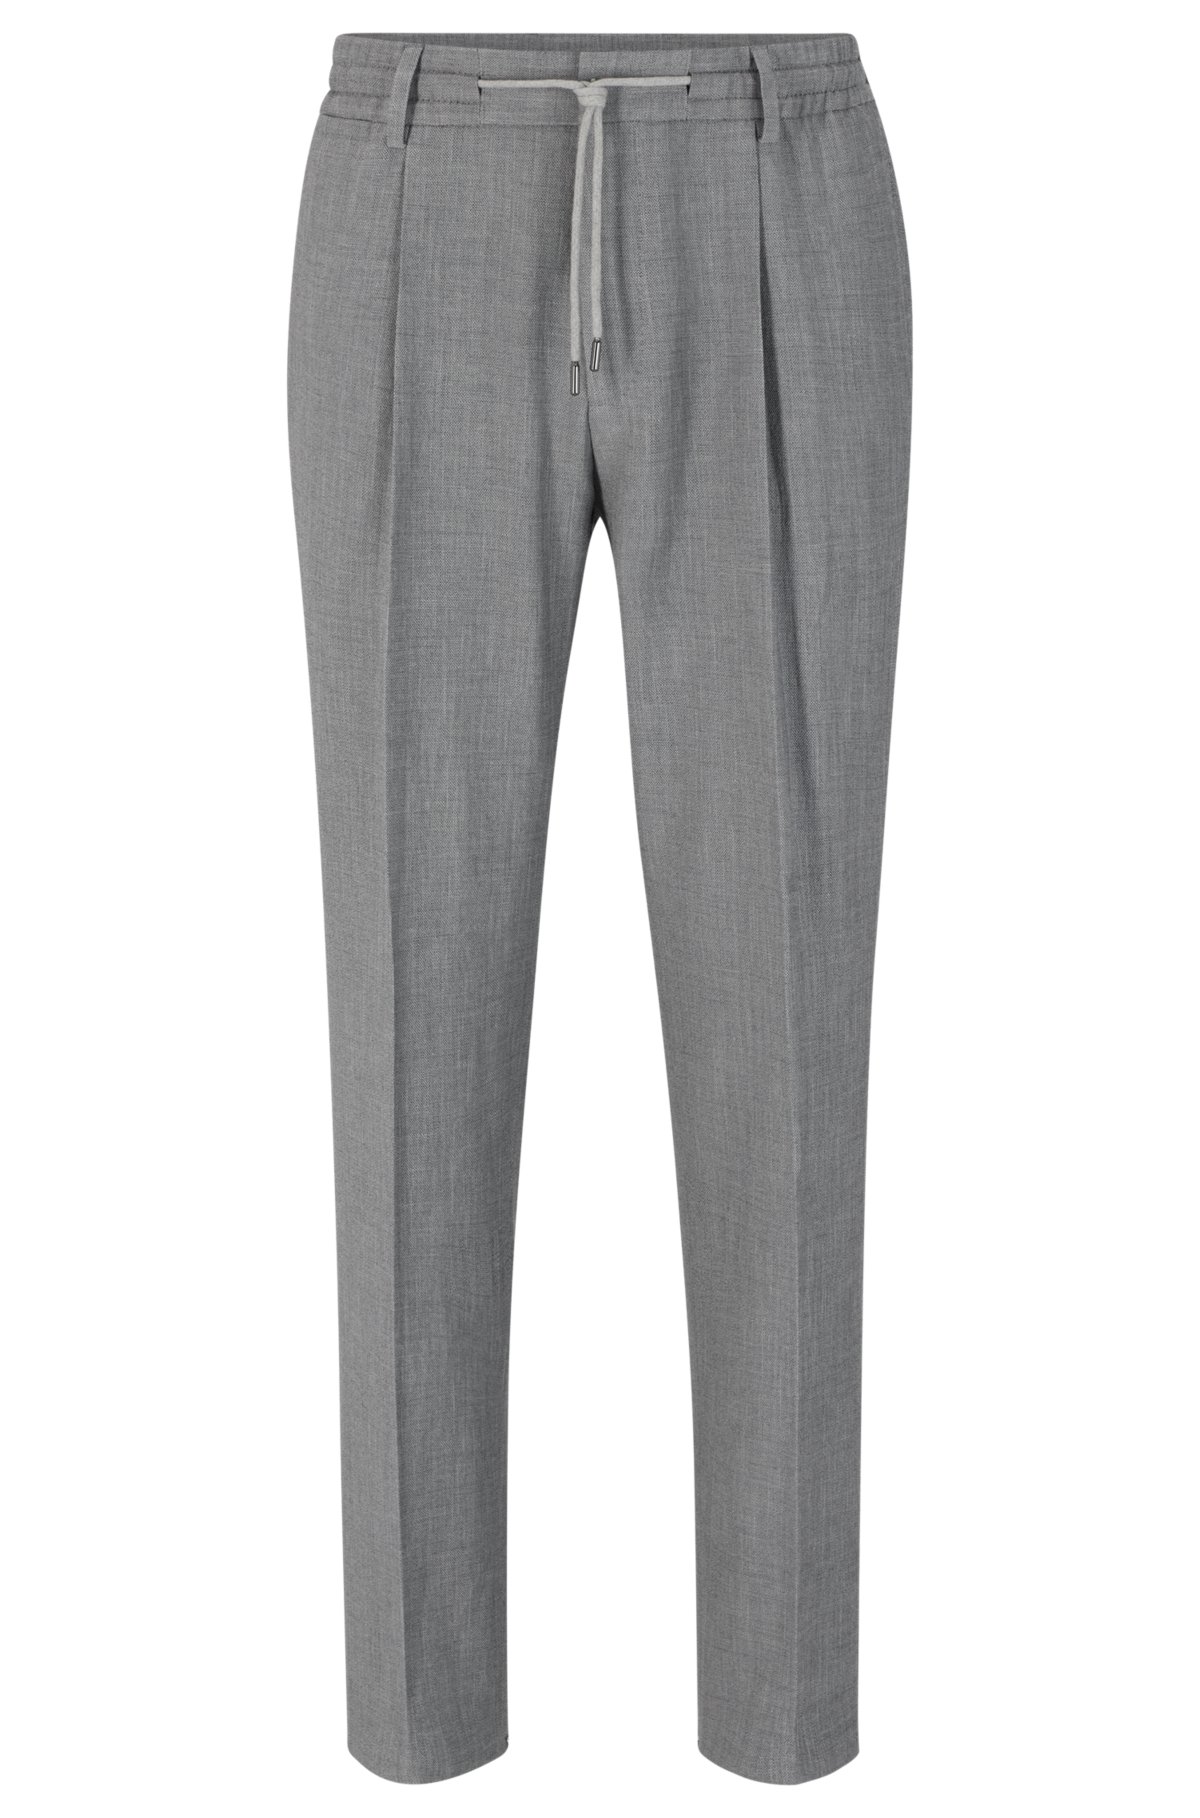 Slim-fit formal trousers with drawstring waist